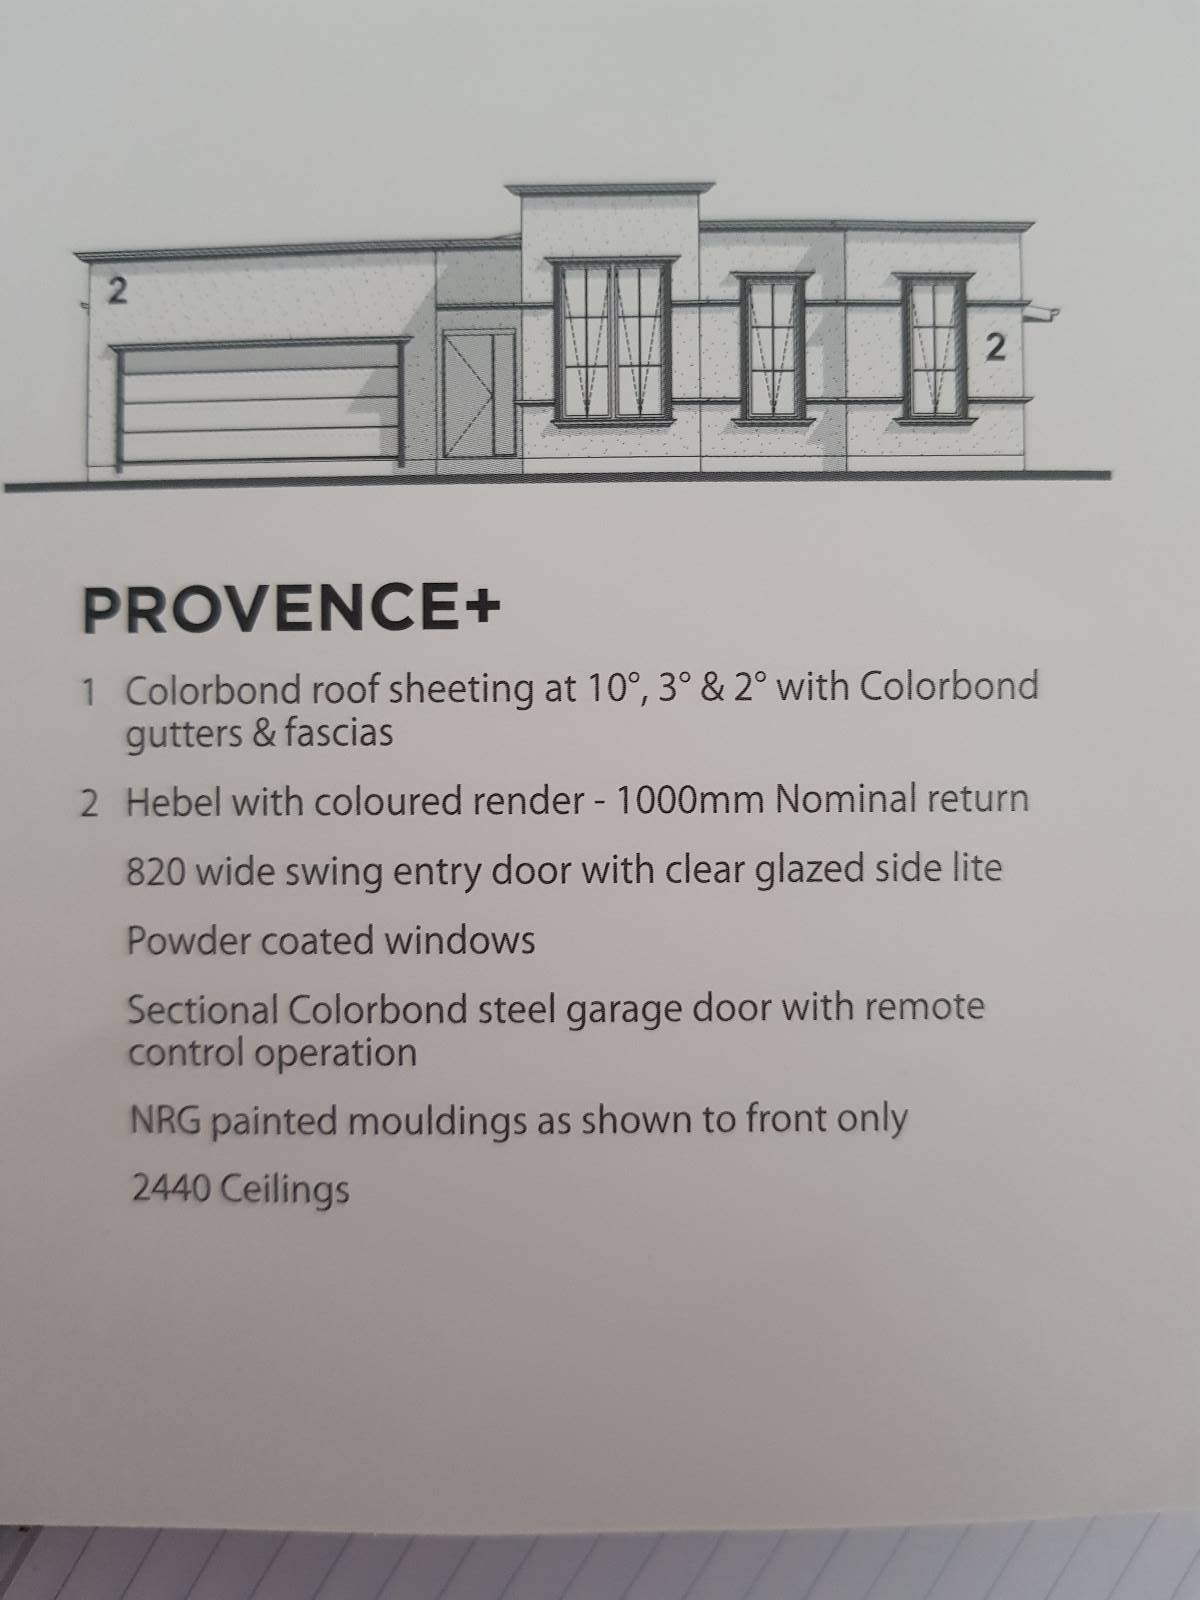 Building new house - Provence or Traditional